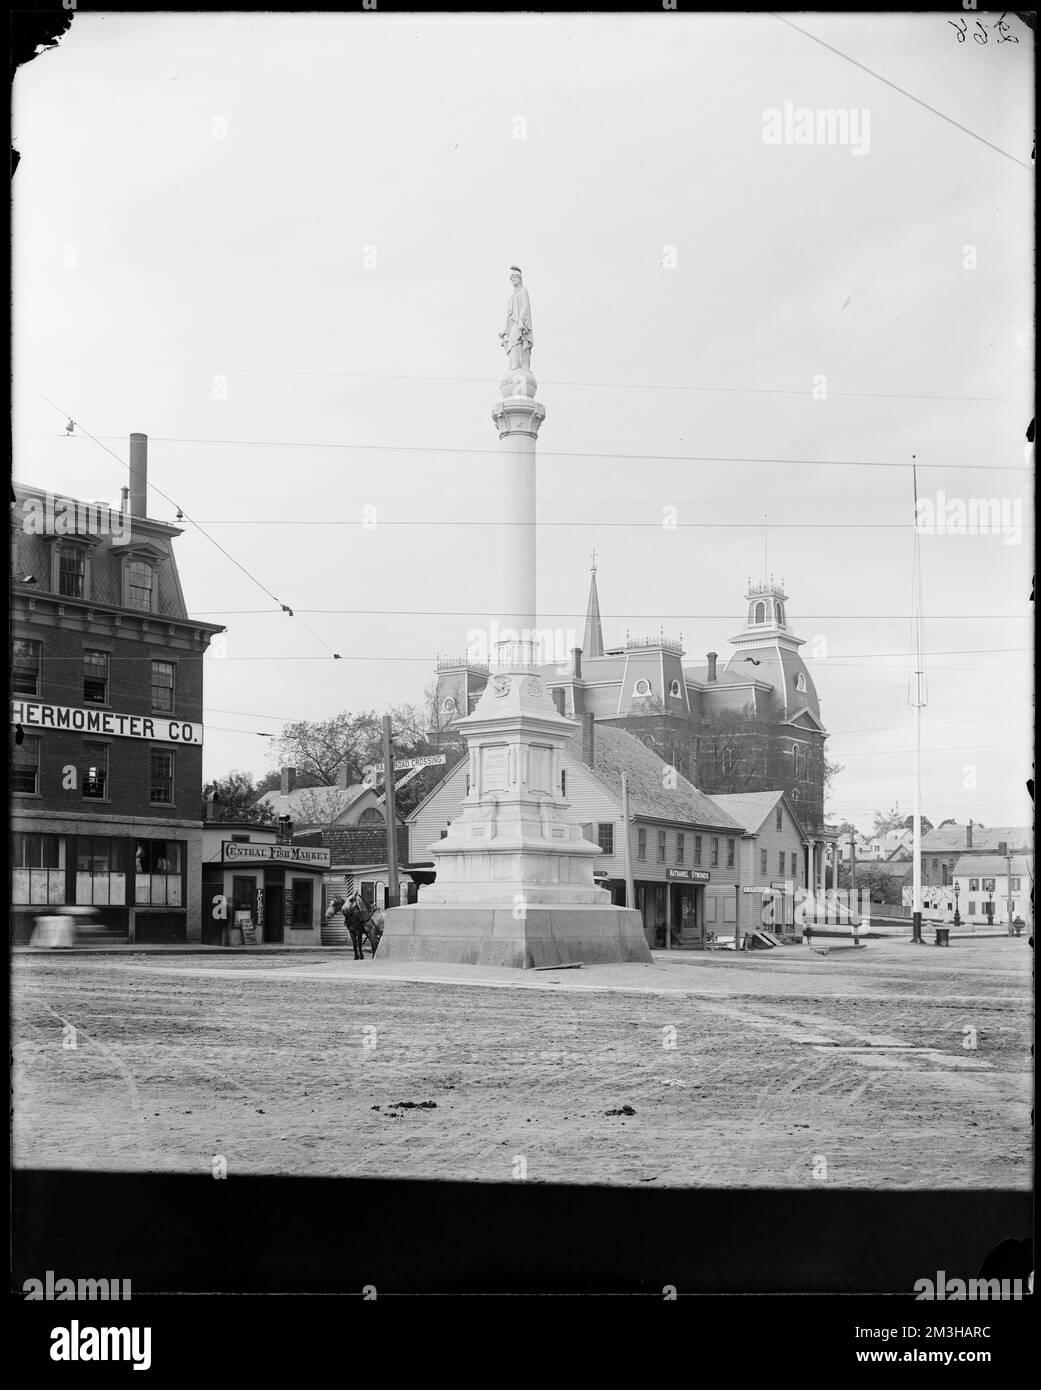 Monuments, Peabody, Peabody Square, Soldiers Monument , Plazas ...